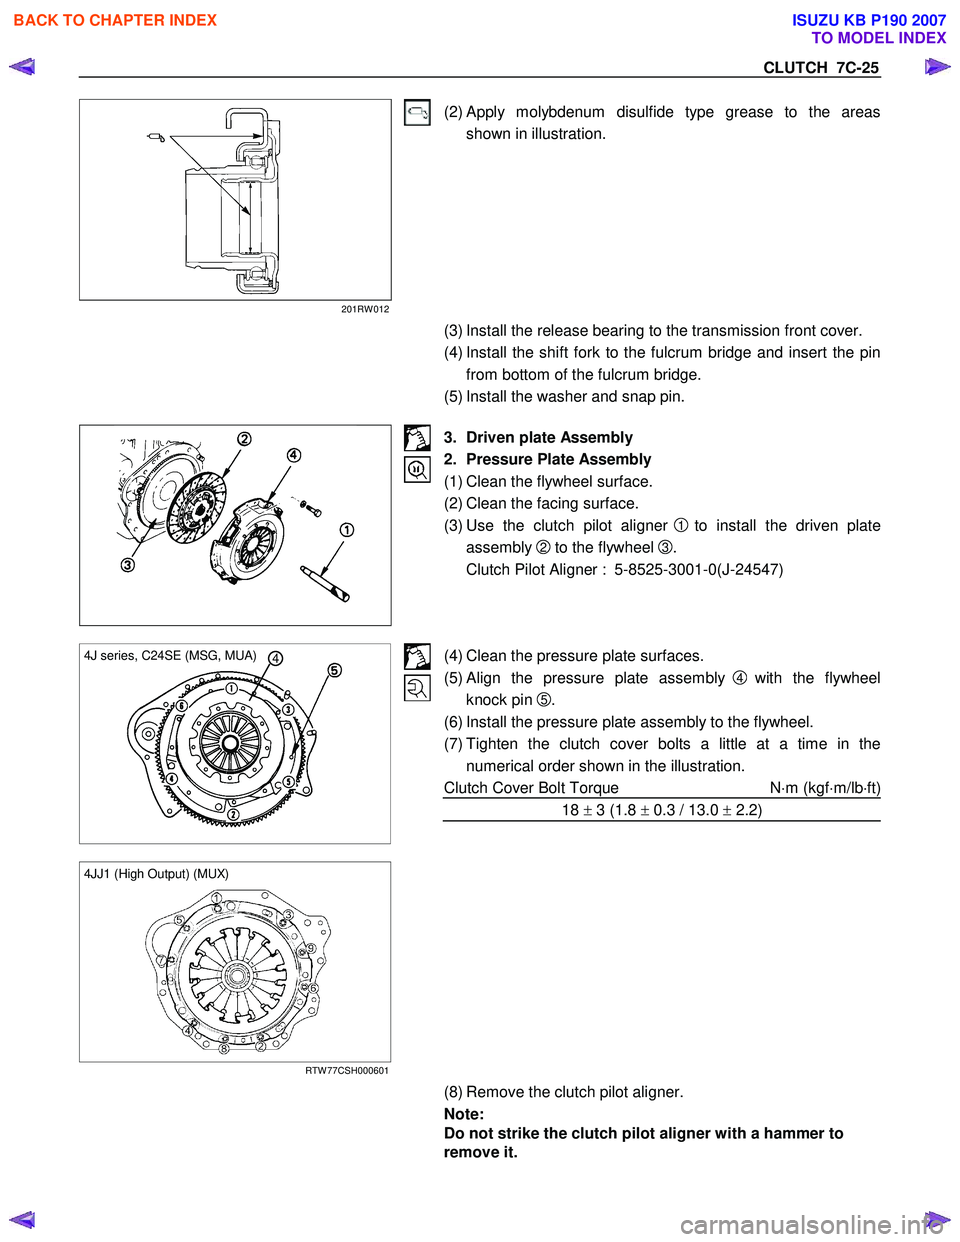 ISUZU KB P190 2007  Workshop Manual PDF CLUTCH  7C-25 
201RW 012 
(2) Apply molybdenum disulfide type grease to the areas shown in illustration. 
   (3) Install the release bearing to the transmission front cover.  
(4) Install the shift fo